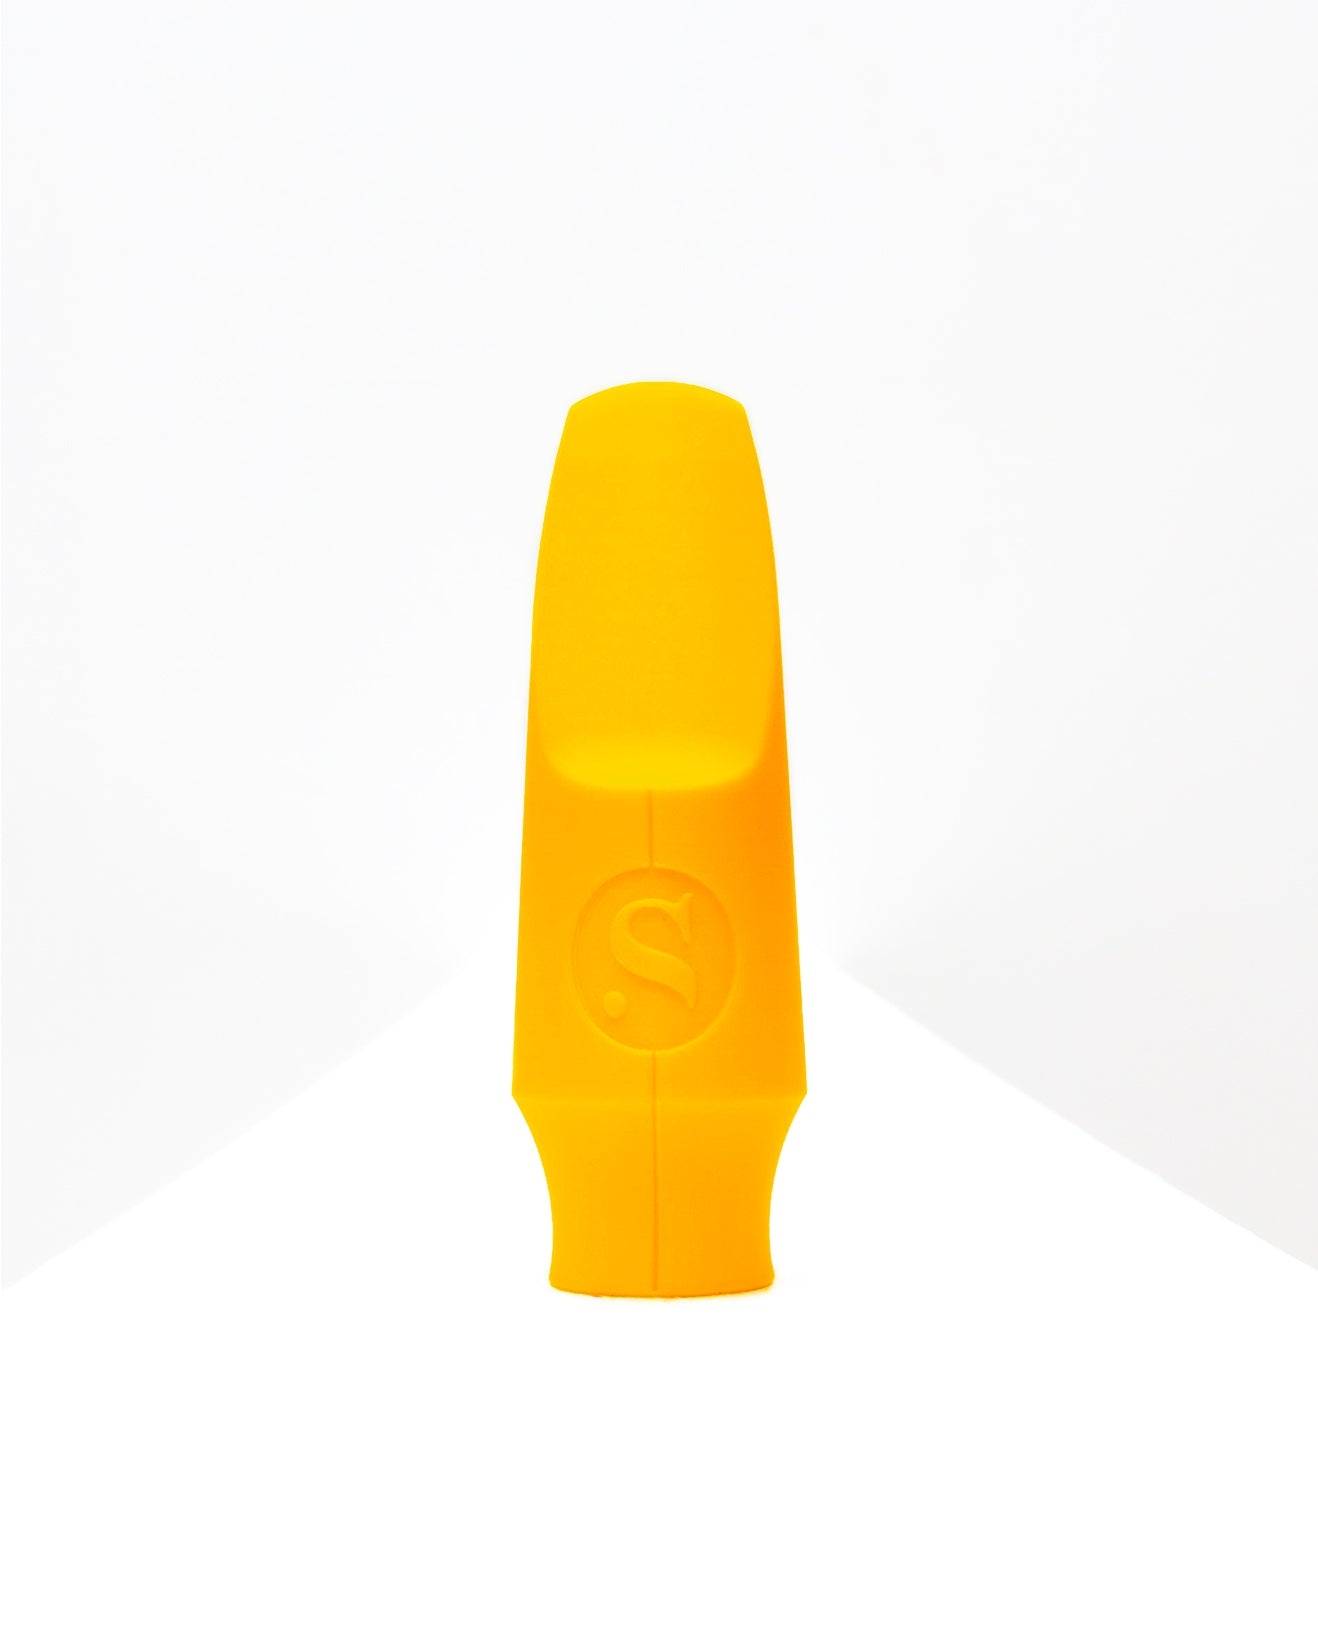 Alto Signature Saxophone mouthpiece - Jimmy Sax by Syos - 9 / Mellow Yellow